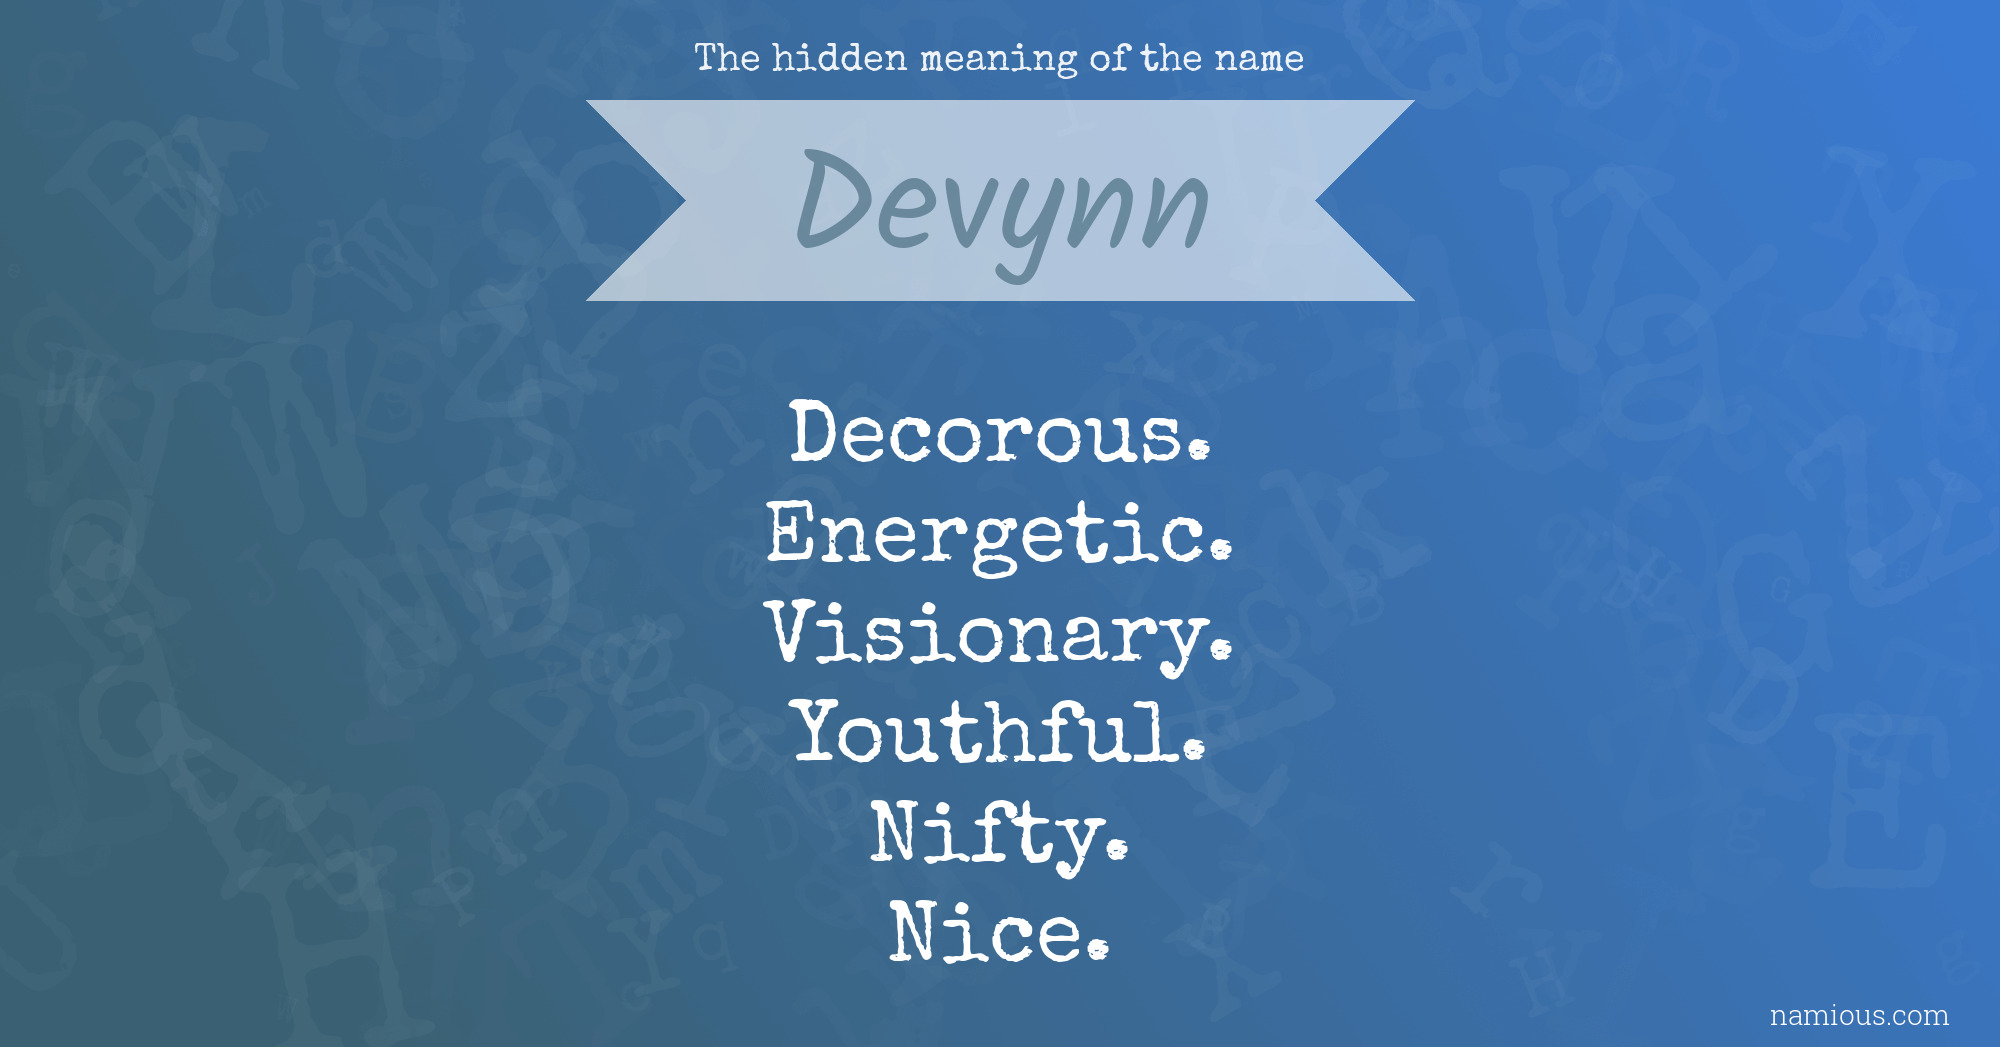 The hidden meaning of the name Devynn